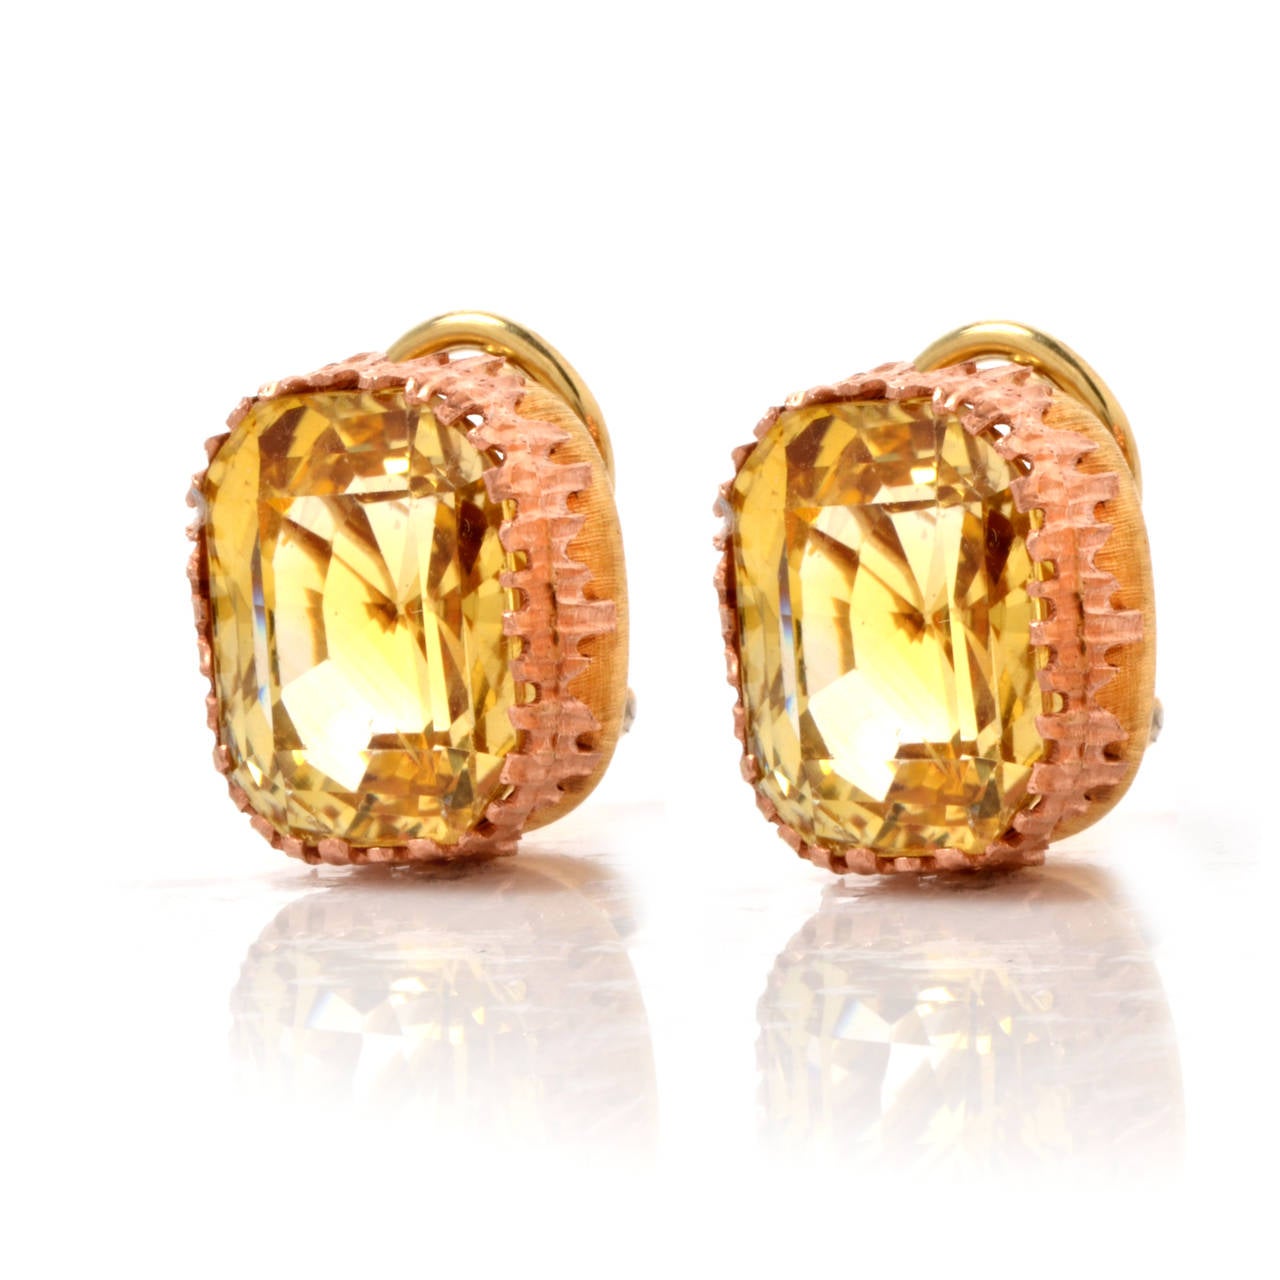 These well-designed clip earrings are  crafted in a combination of  solid 18K  matted yellow and rose gold, weighing approx. 10.7 grams and measuring approx. 14 mm X 10 mm . These earrings are adorned with a pair of antique rectangular cushion